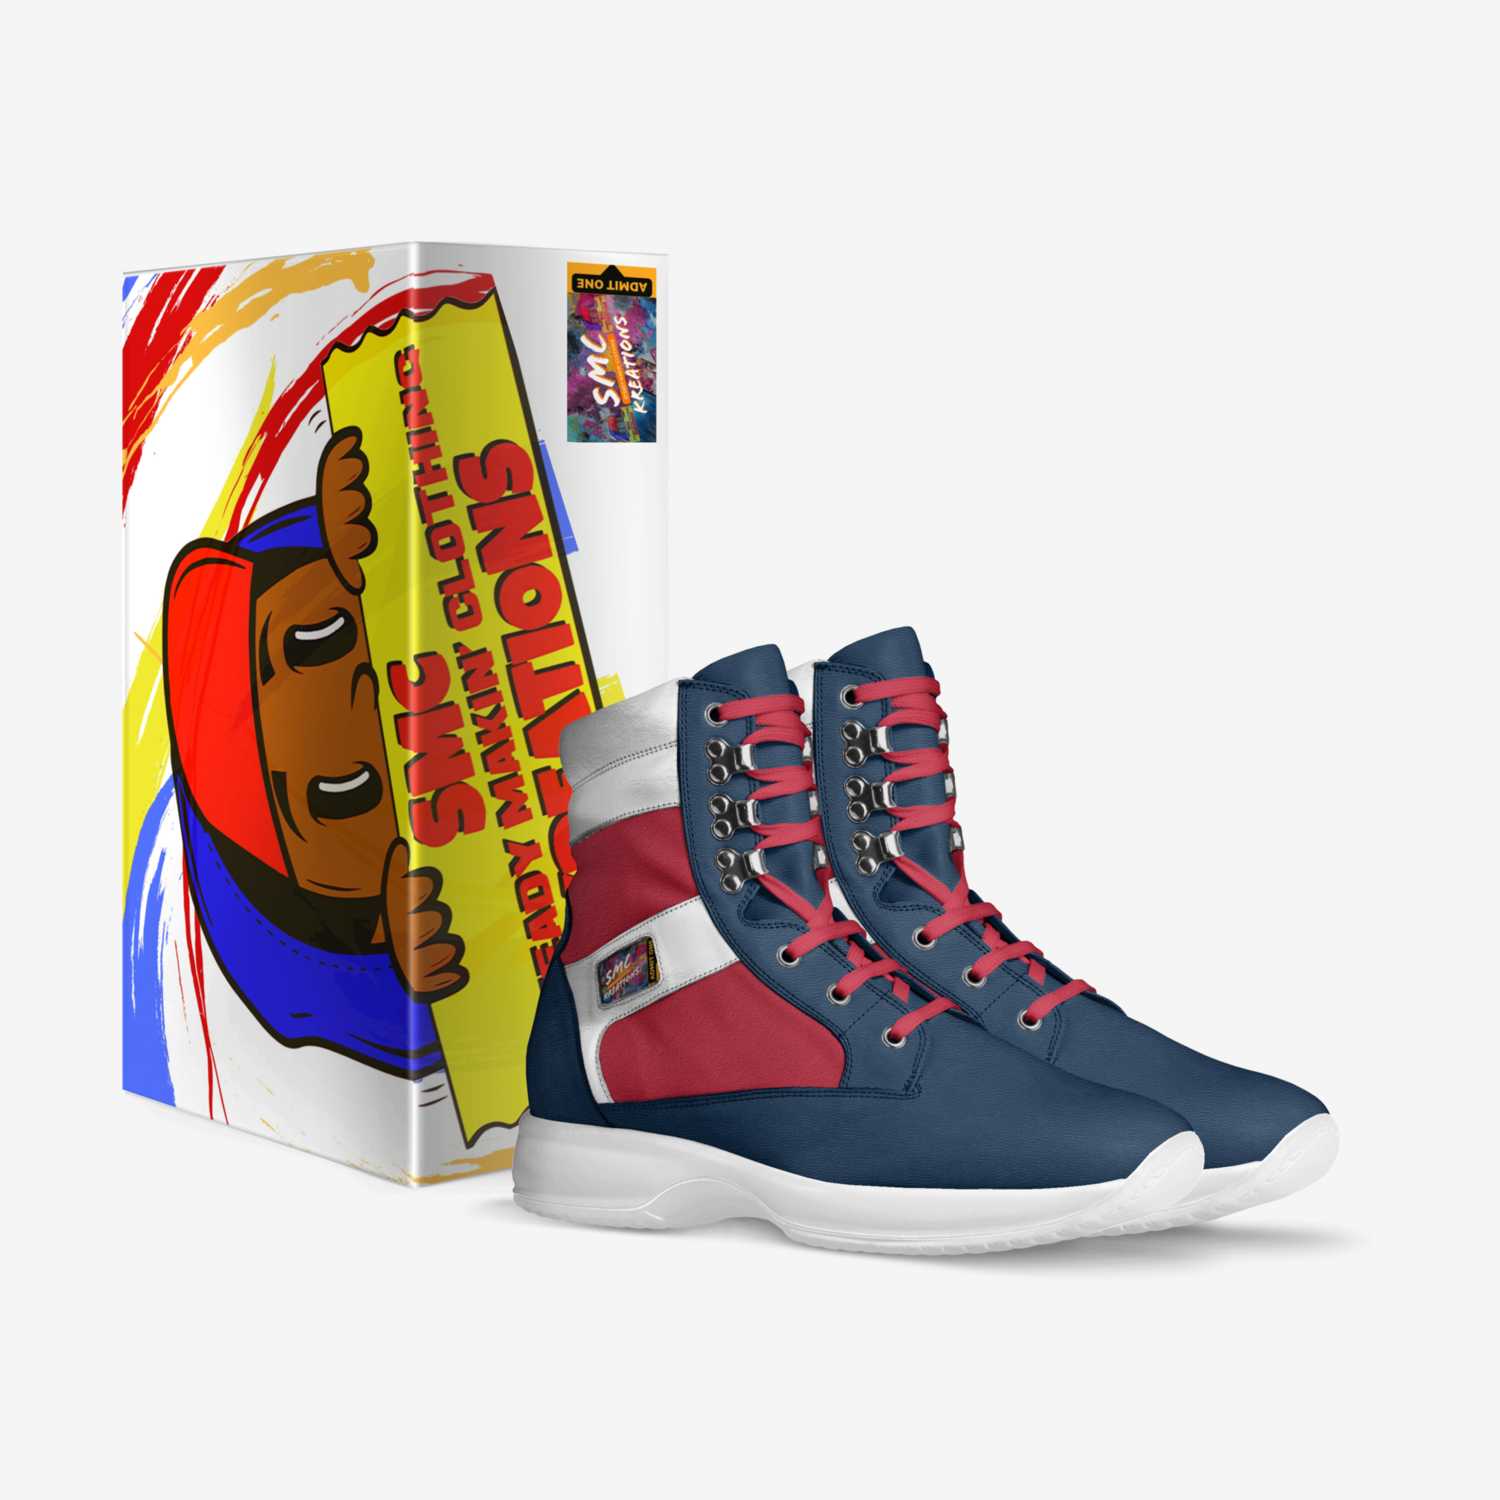 CMBT Capt. America custom made in Italy shoes by Shawn Mcnair | Box view